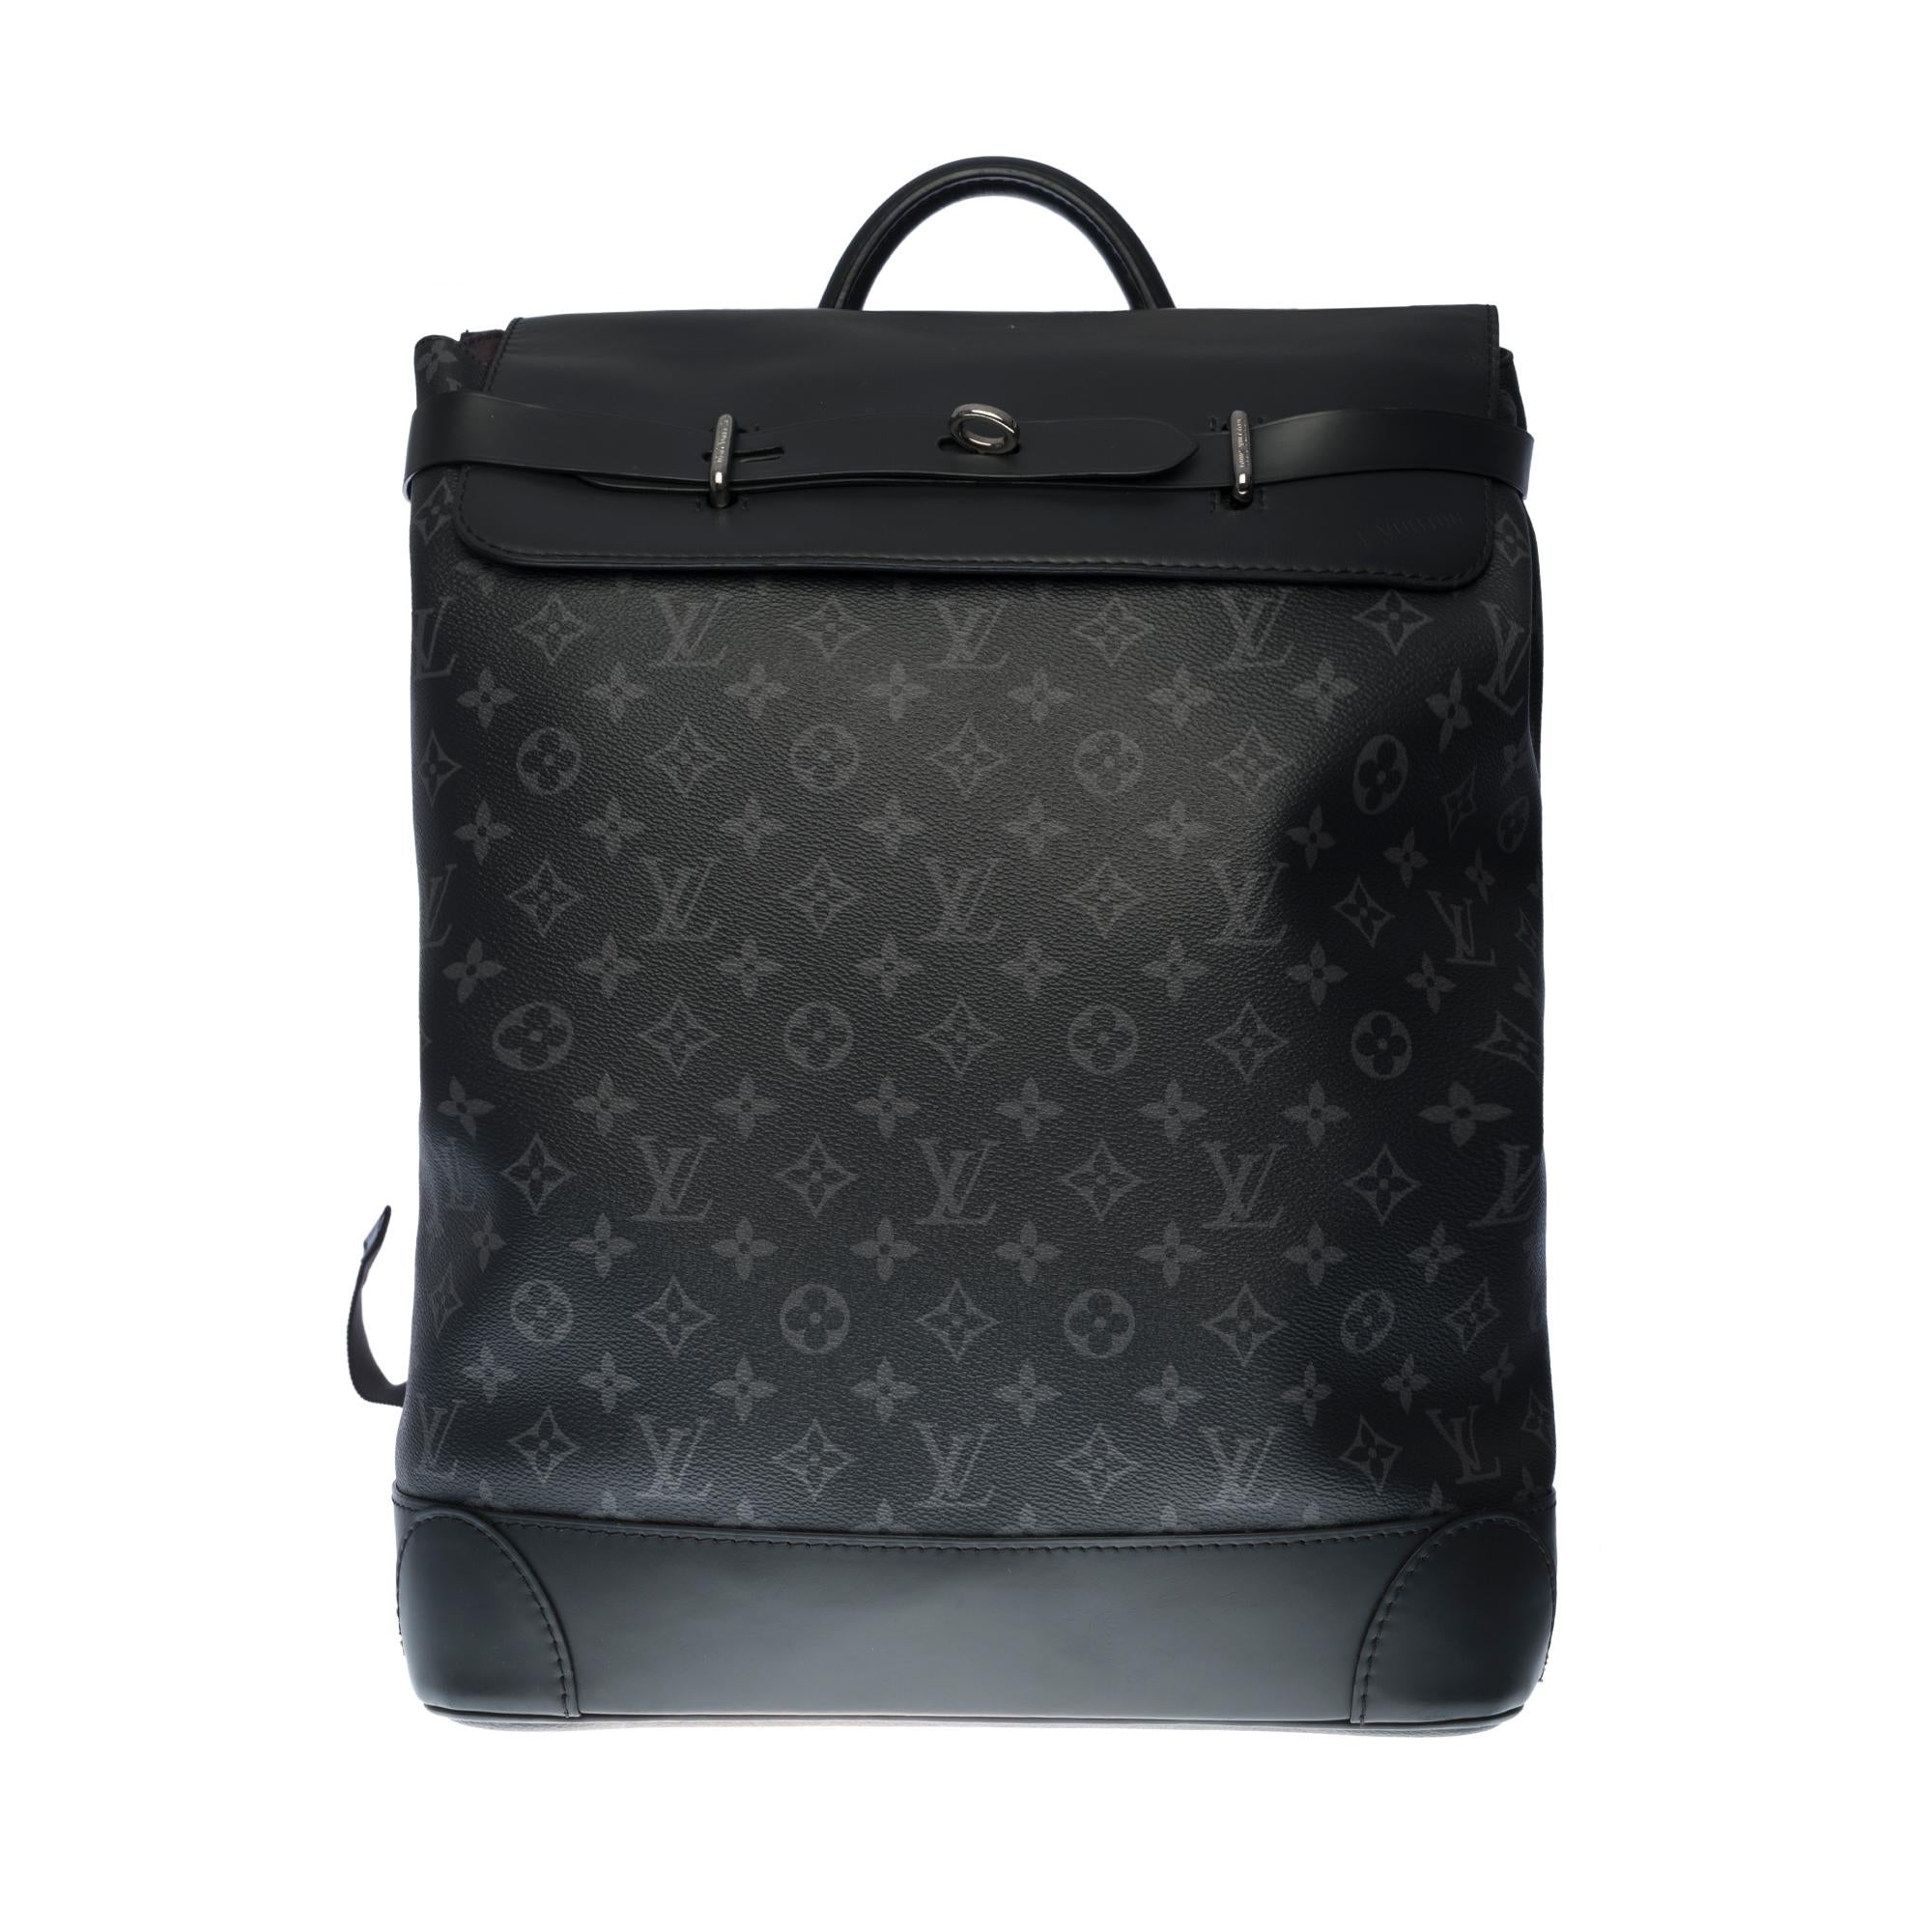 Inspired by the historic Louis Vuitton steamer bag, this Steamer Backpack in supple Monogram Eclipse coated canvas with its smart new key shape has a fashion-forward vintage feel. The House craftsmanship is evident in the rounded leather corners and